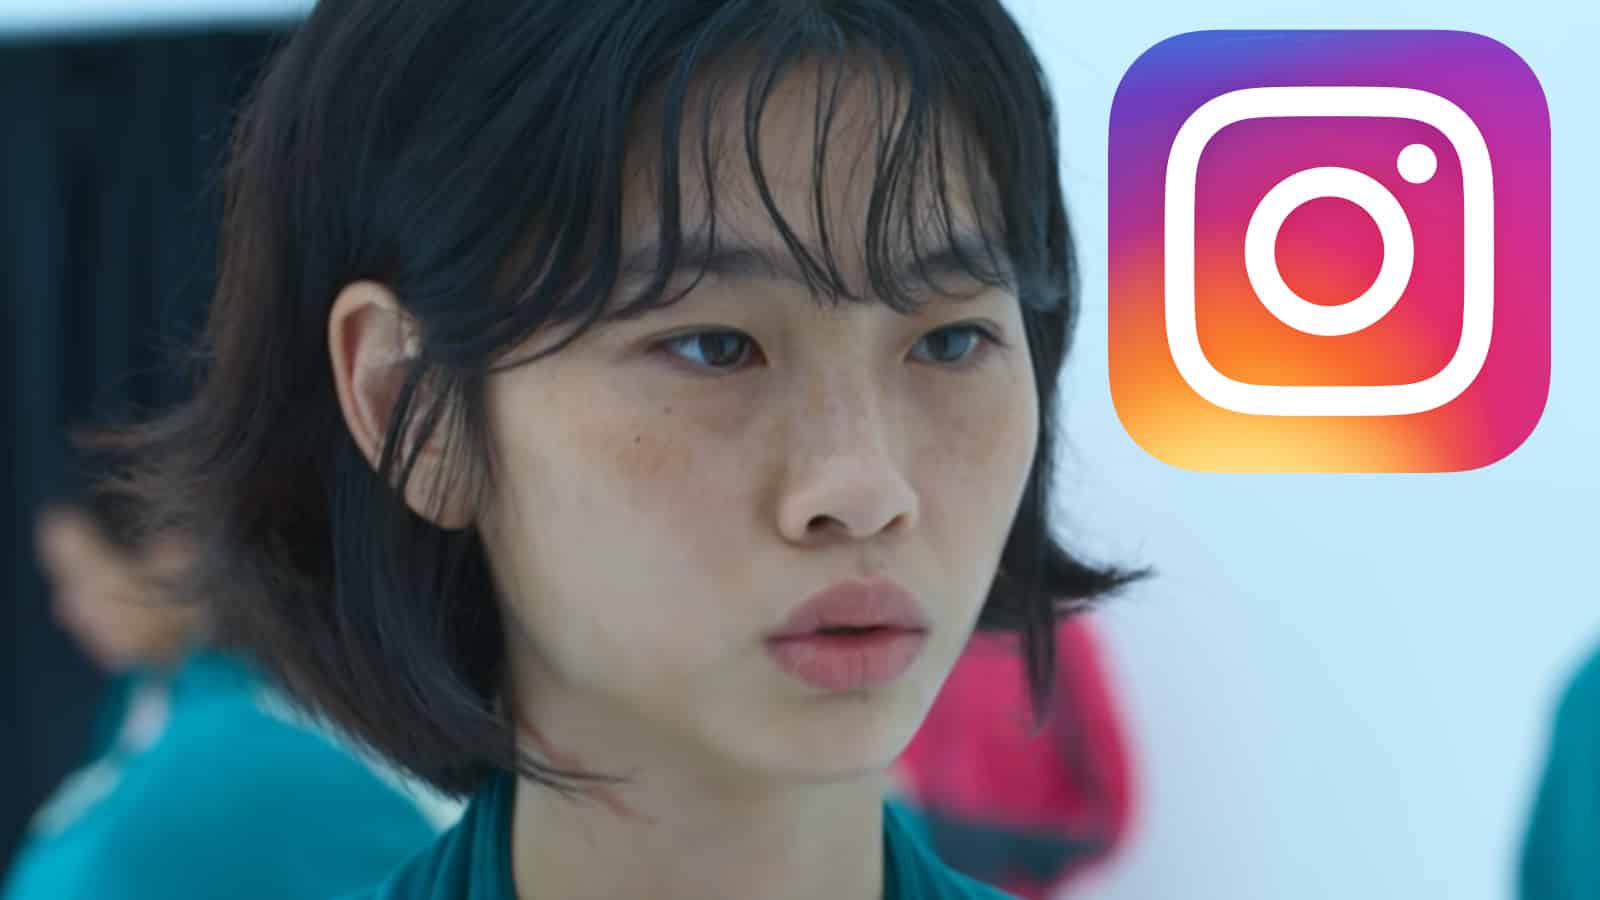 Jung Ho-Yeon is now Korea's most followed actress on IG